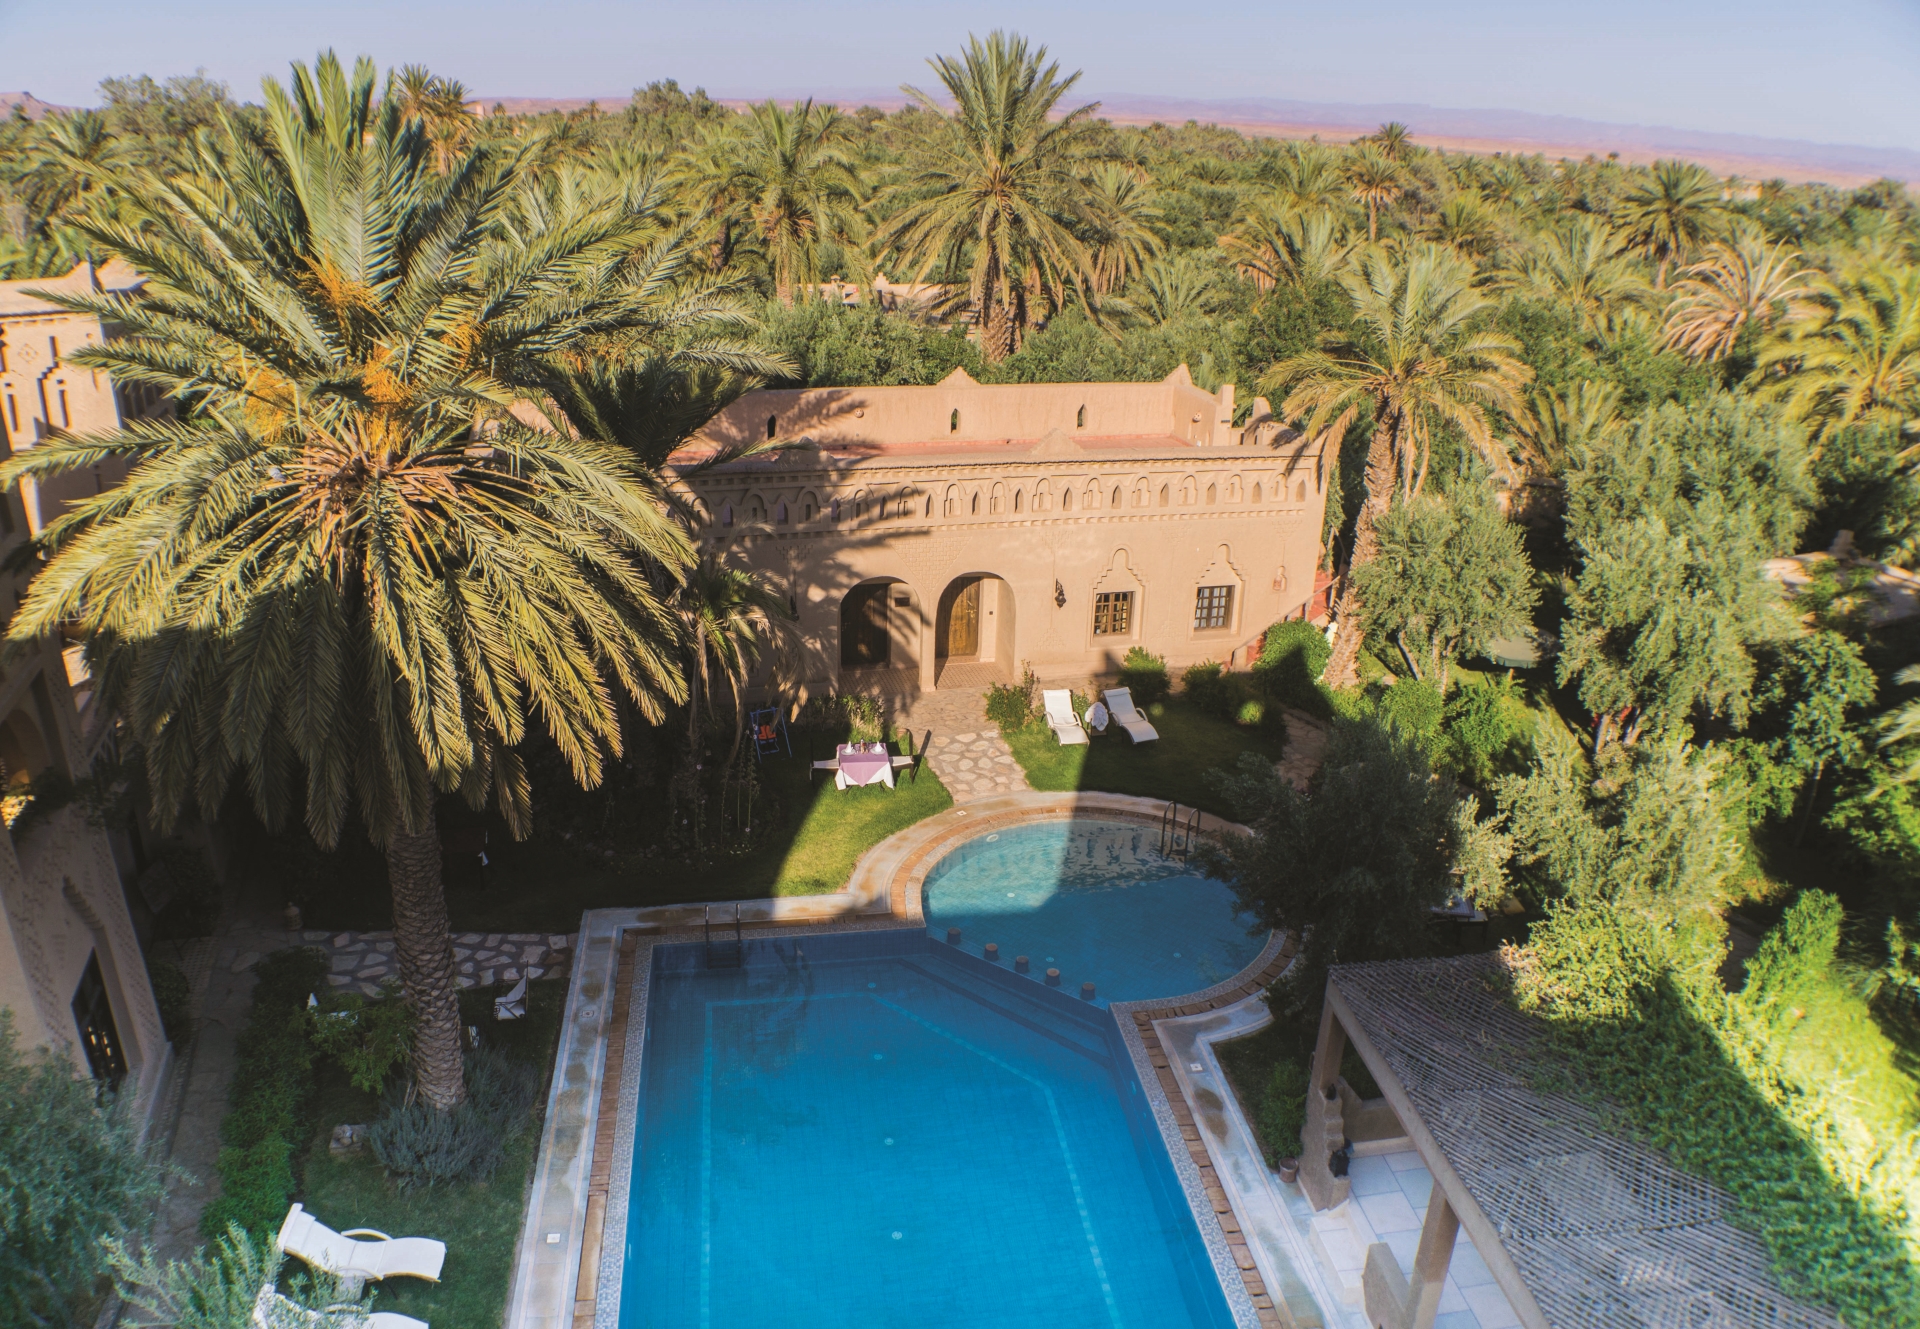 Swimming Pool and surrounding palm grove